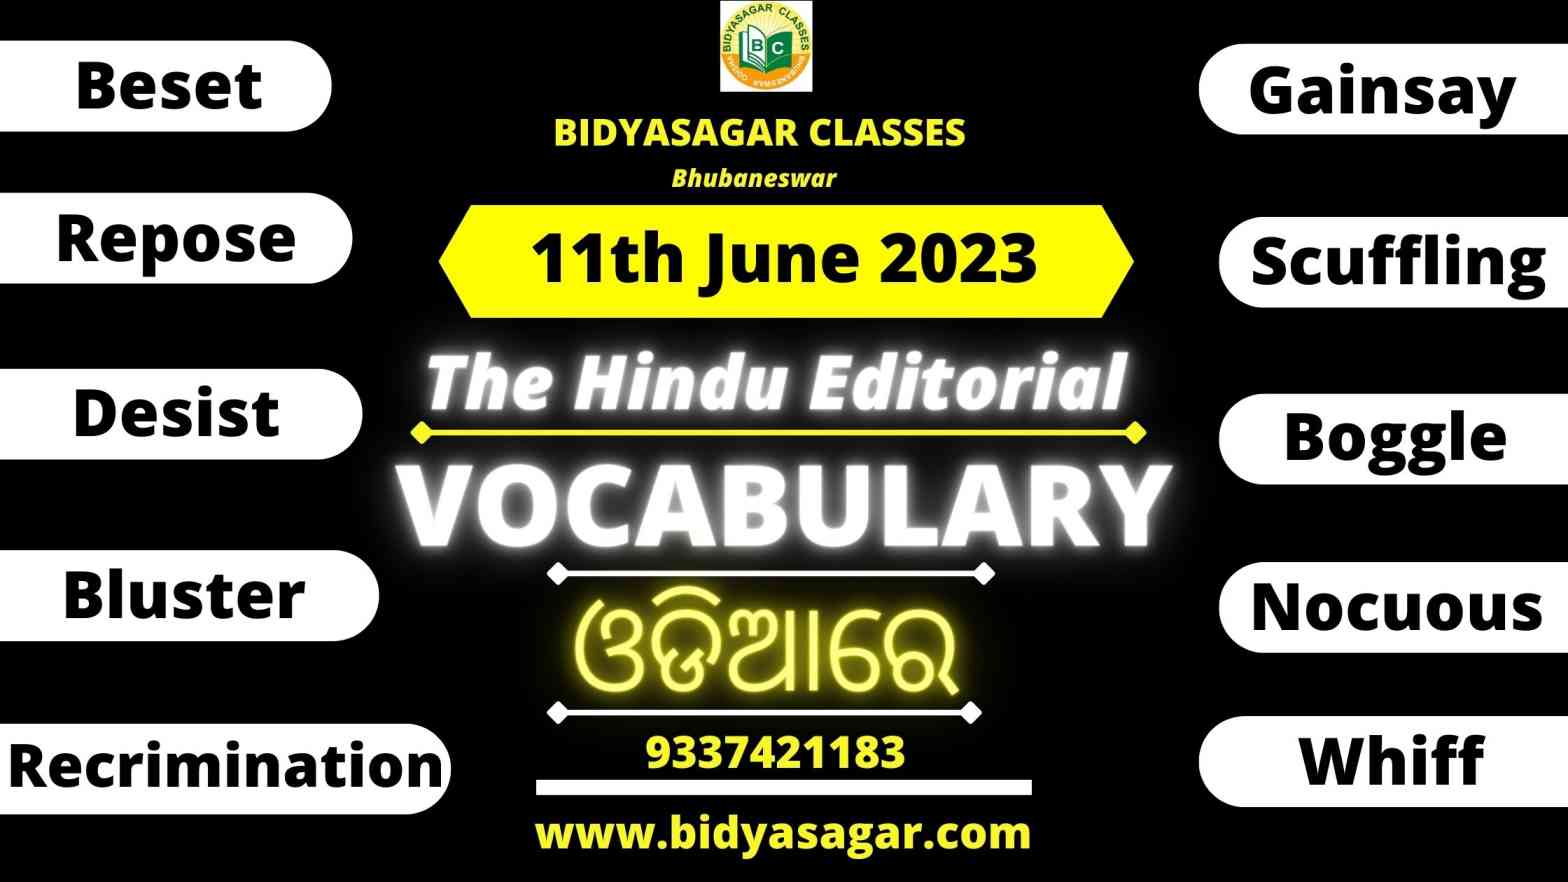 The Hindu Editorial Vocabulary of 11th June 2023